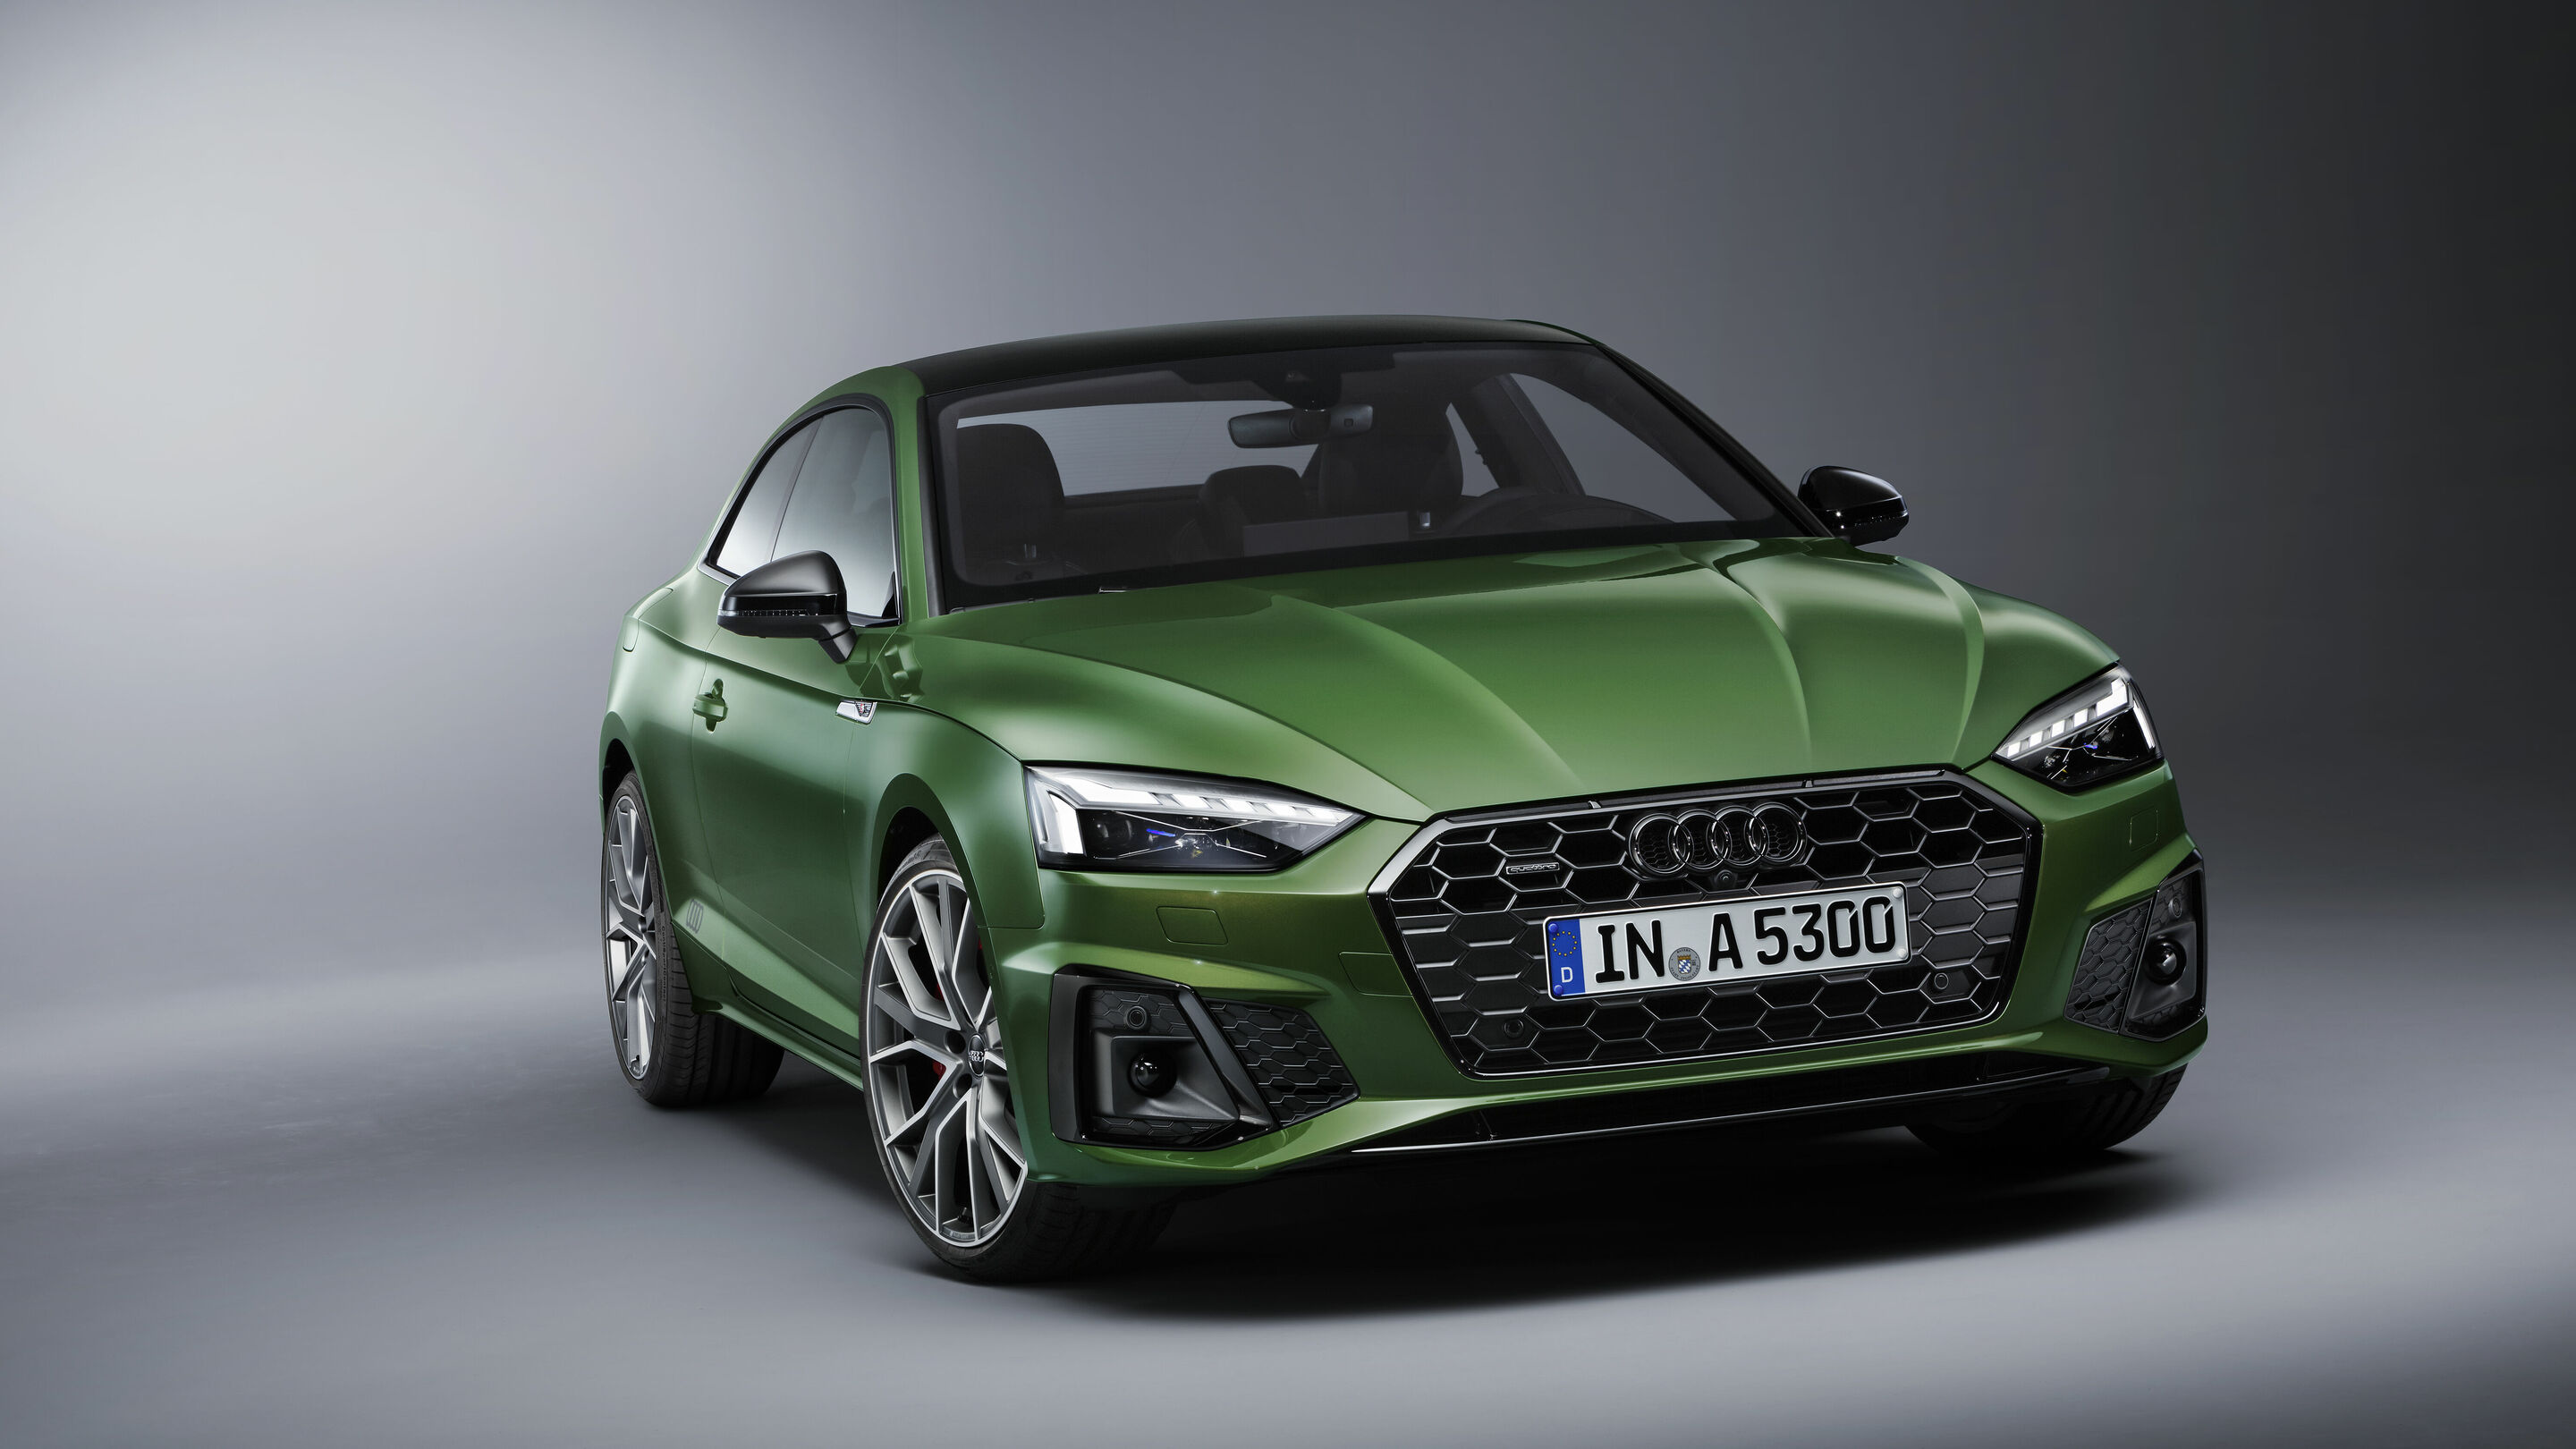 The Audi A5 is now more attractive than ever